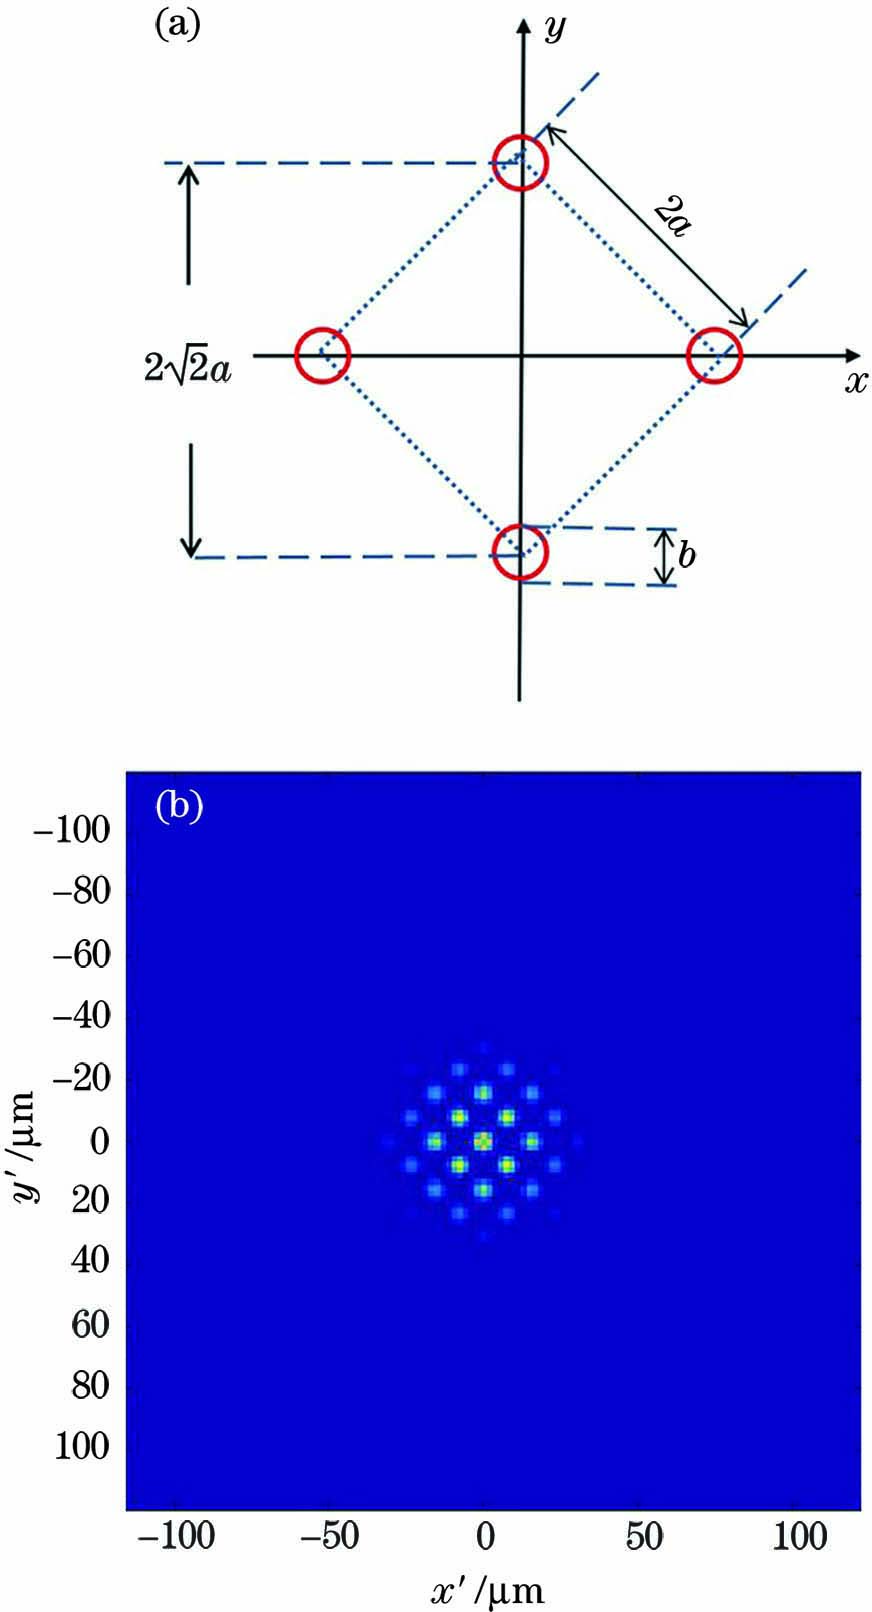 Distribution of four circular holes in the mask and its Fourier spatial spectrum. (a) A mask; (b) Fourier spatial spectrum of the mask